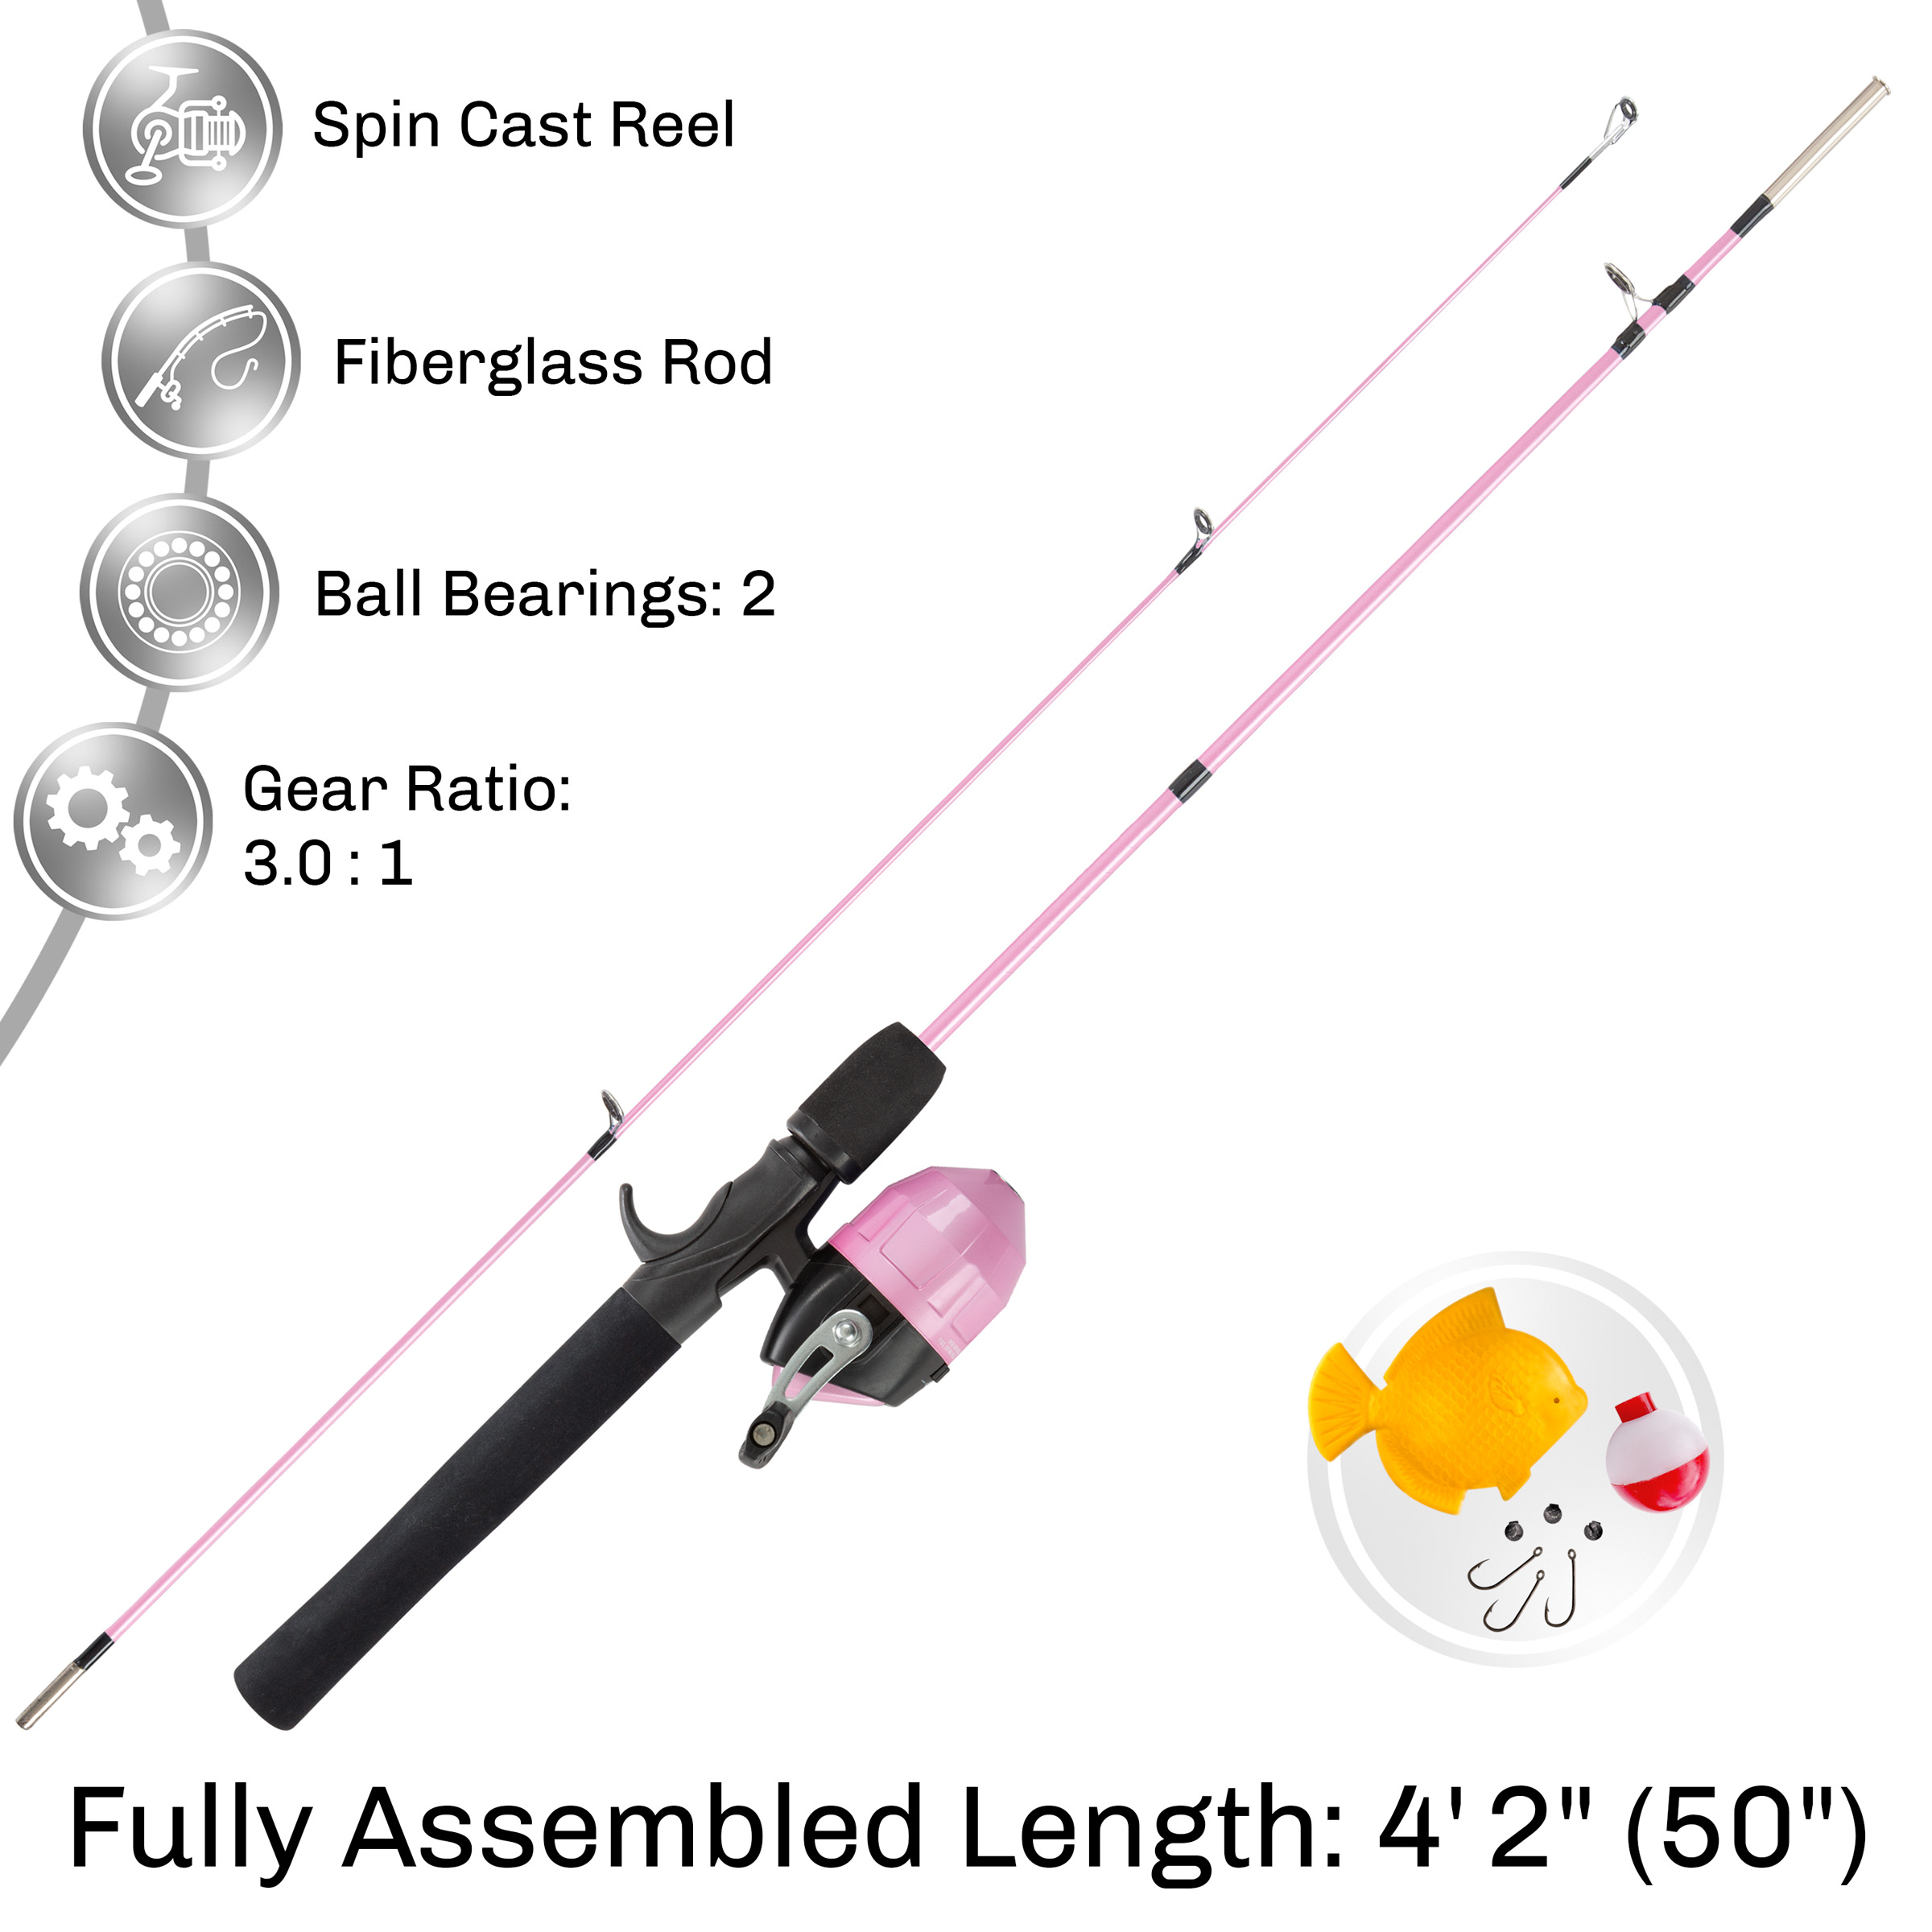 Youth Fishing Rod & Reel Combo-4’2” Fiberglass Pole, Spincast Reel & 8-Piece Tackle Kit for Kids & Beginners-Shallow Series (Pink) - image 2 of 7